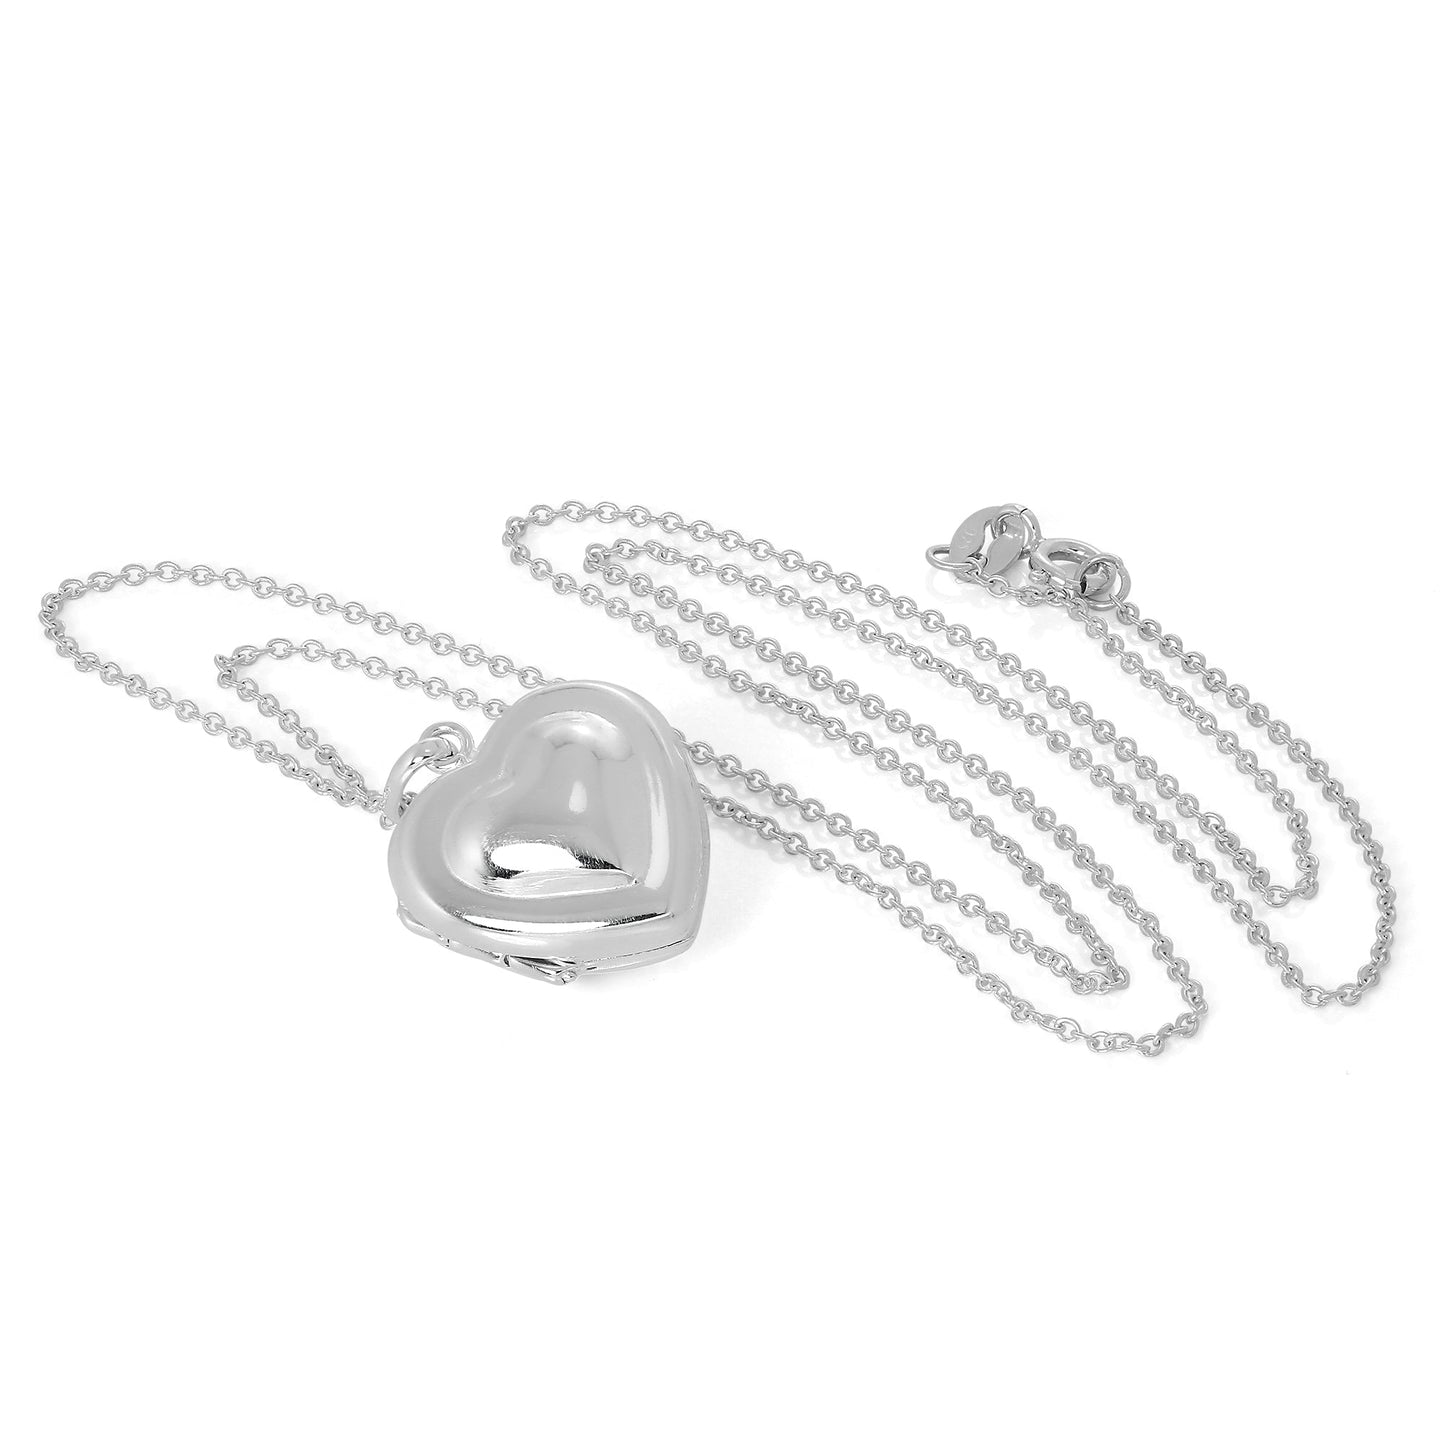 Sterling Silver Double Heart Locket Necklace on Chain